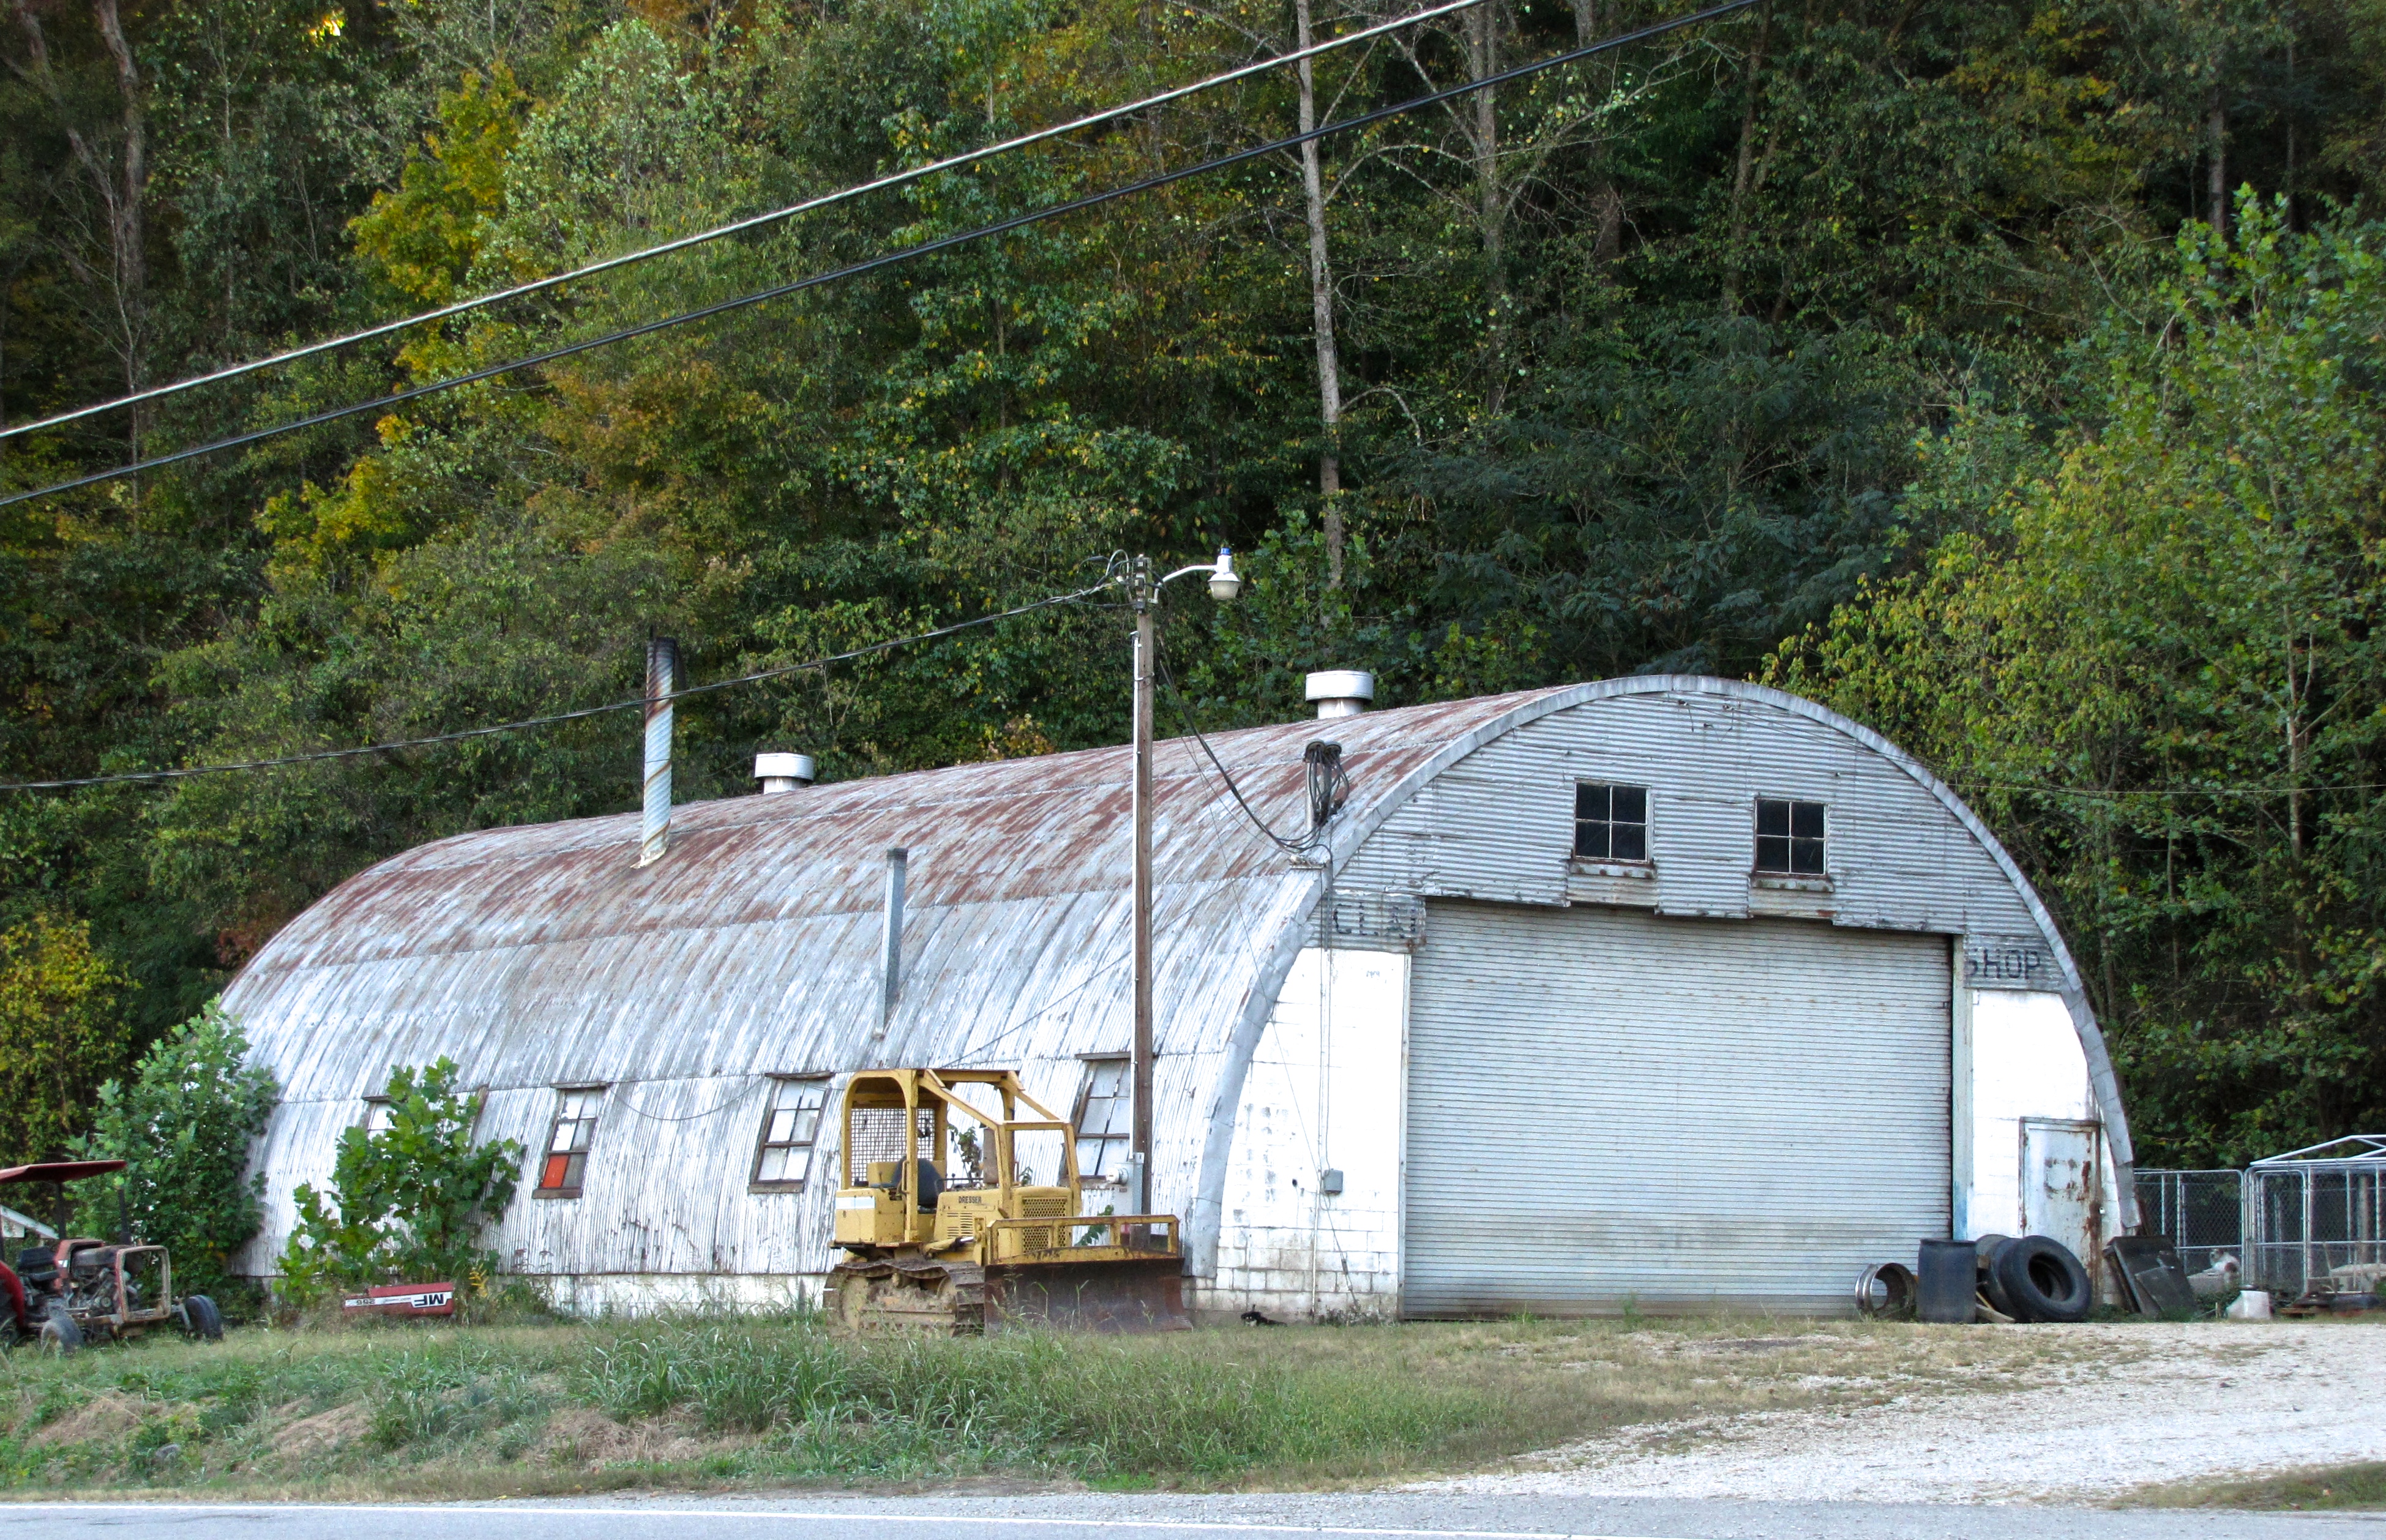 quonset hut in Hot Springs Village, AR